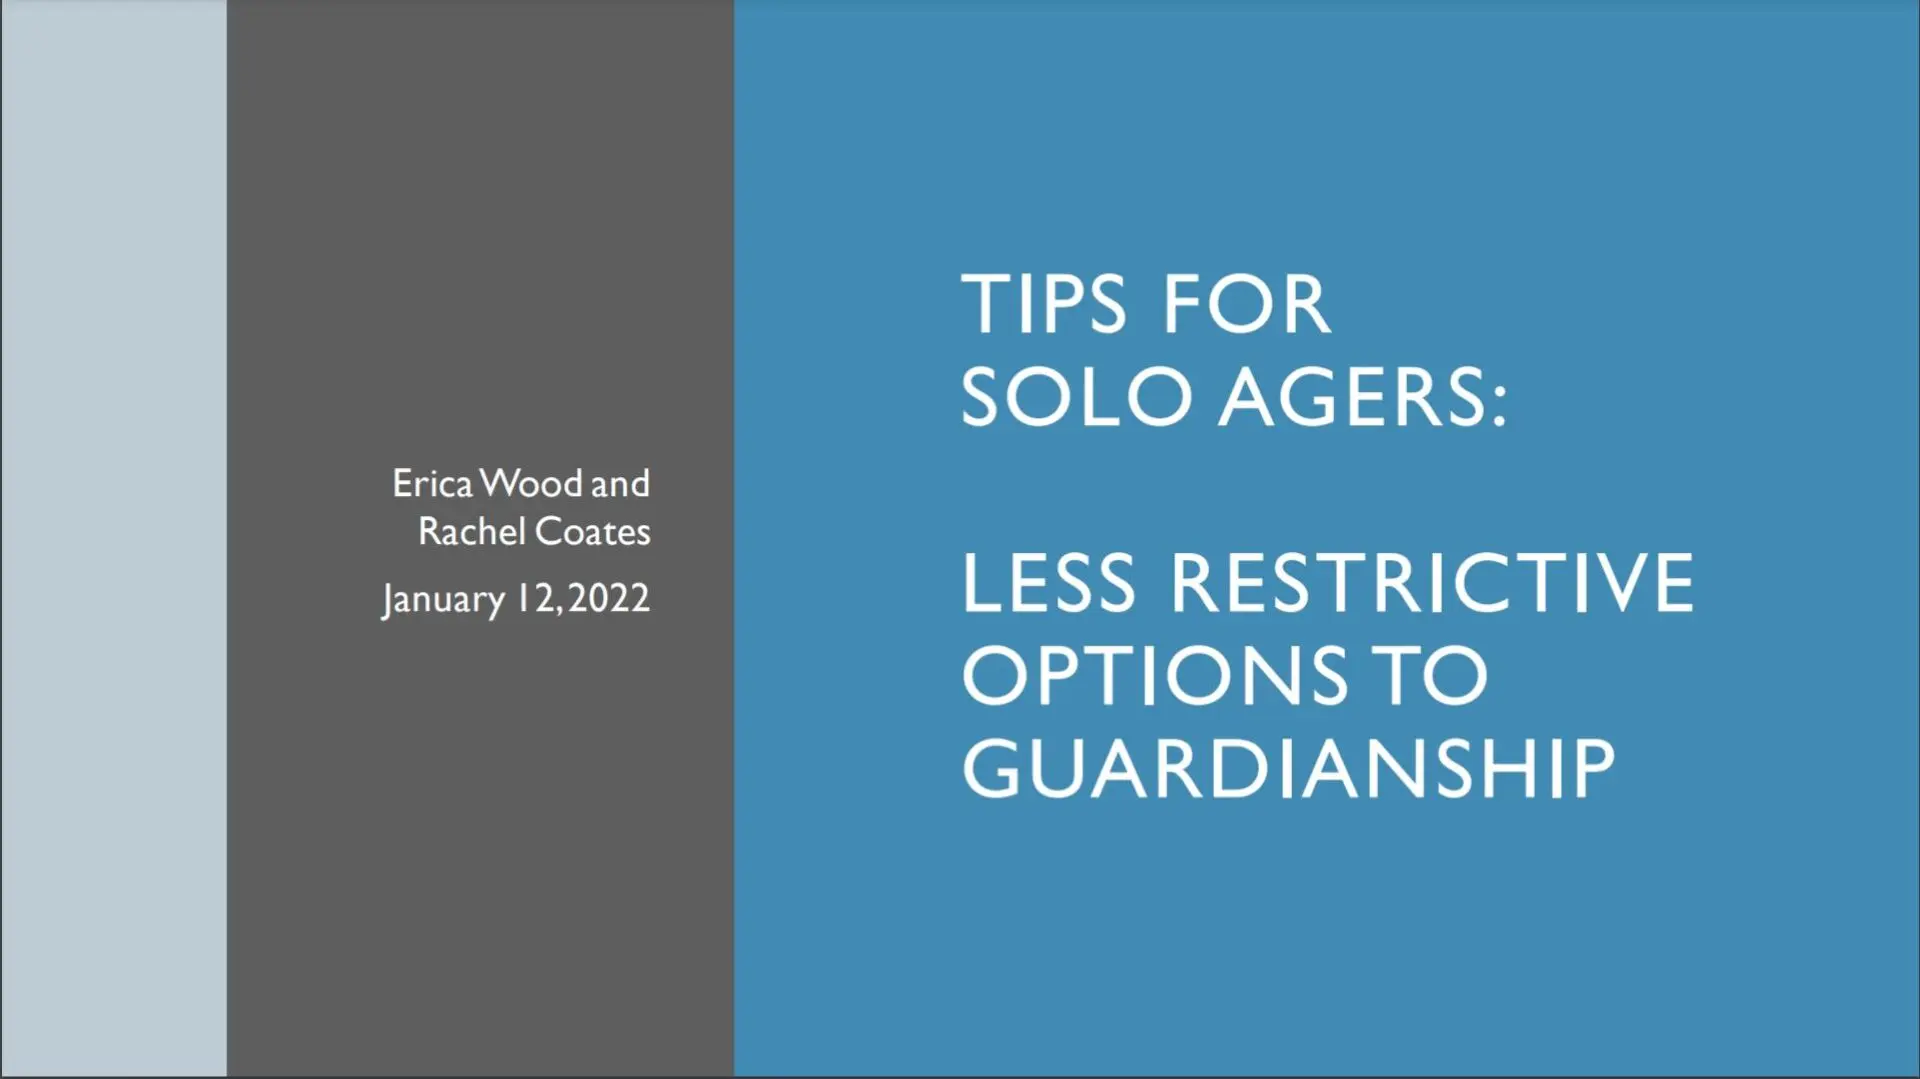 Tips-for-Solo-Agers-Jan-2022